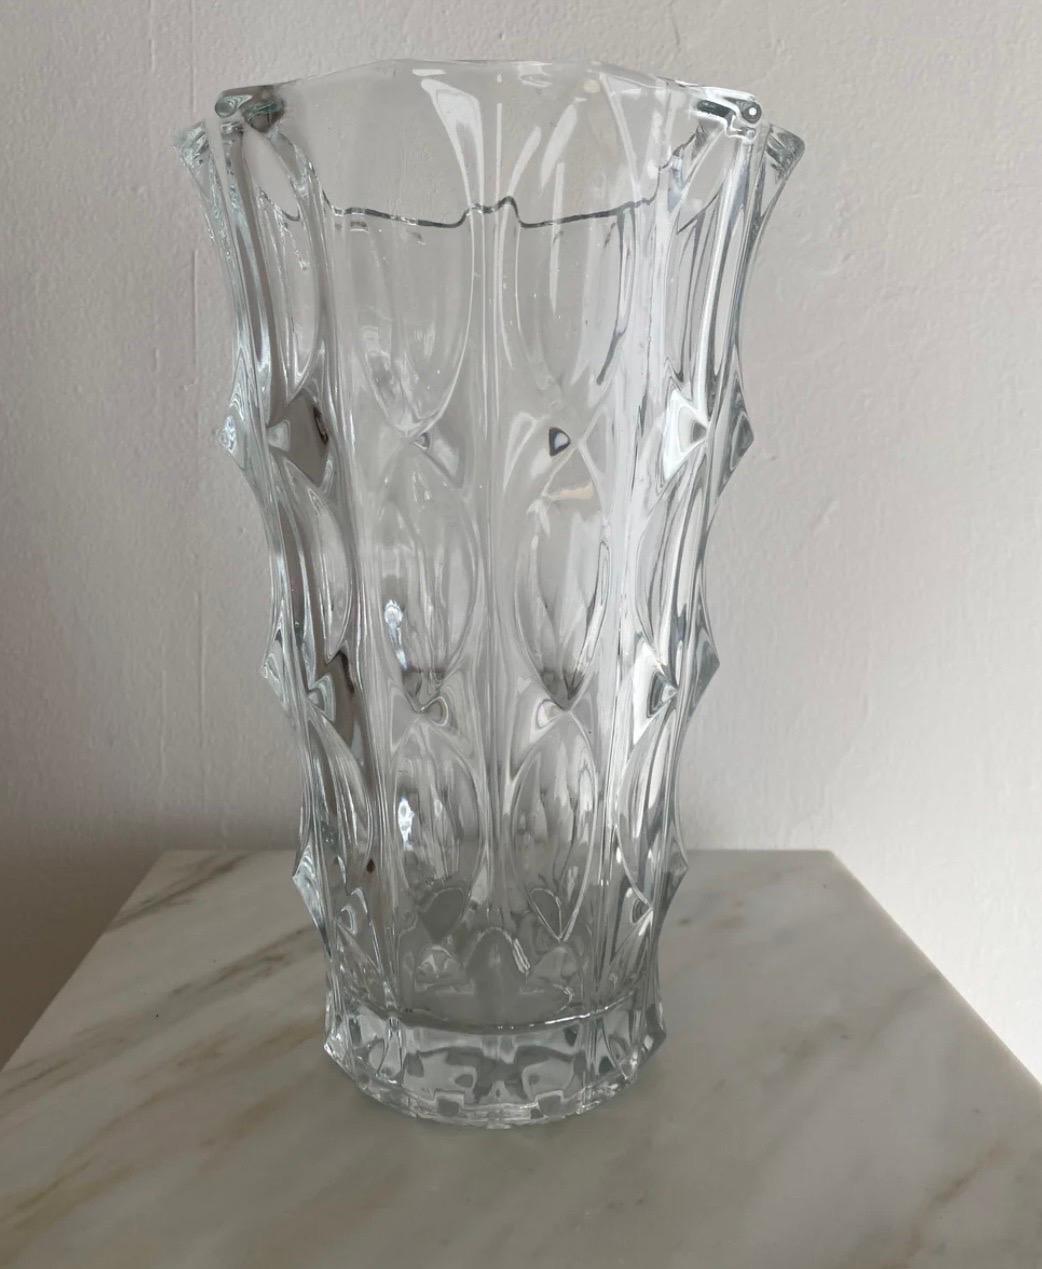 Beautiful 1940s French Crystal Vase. In excellent vintage condition.